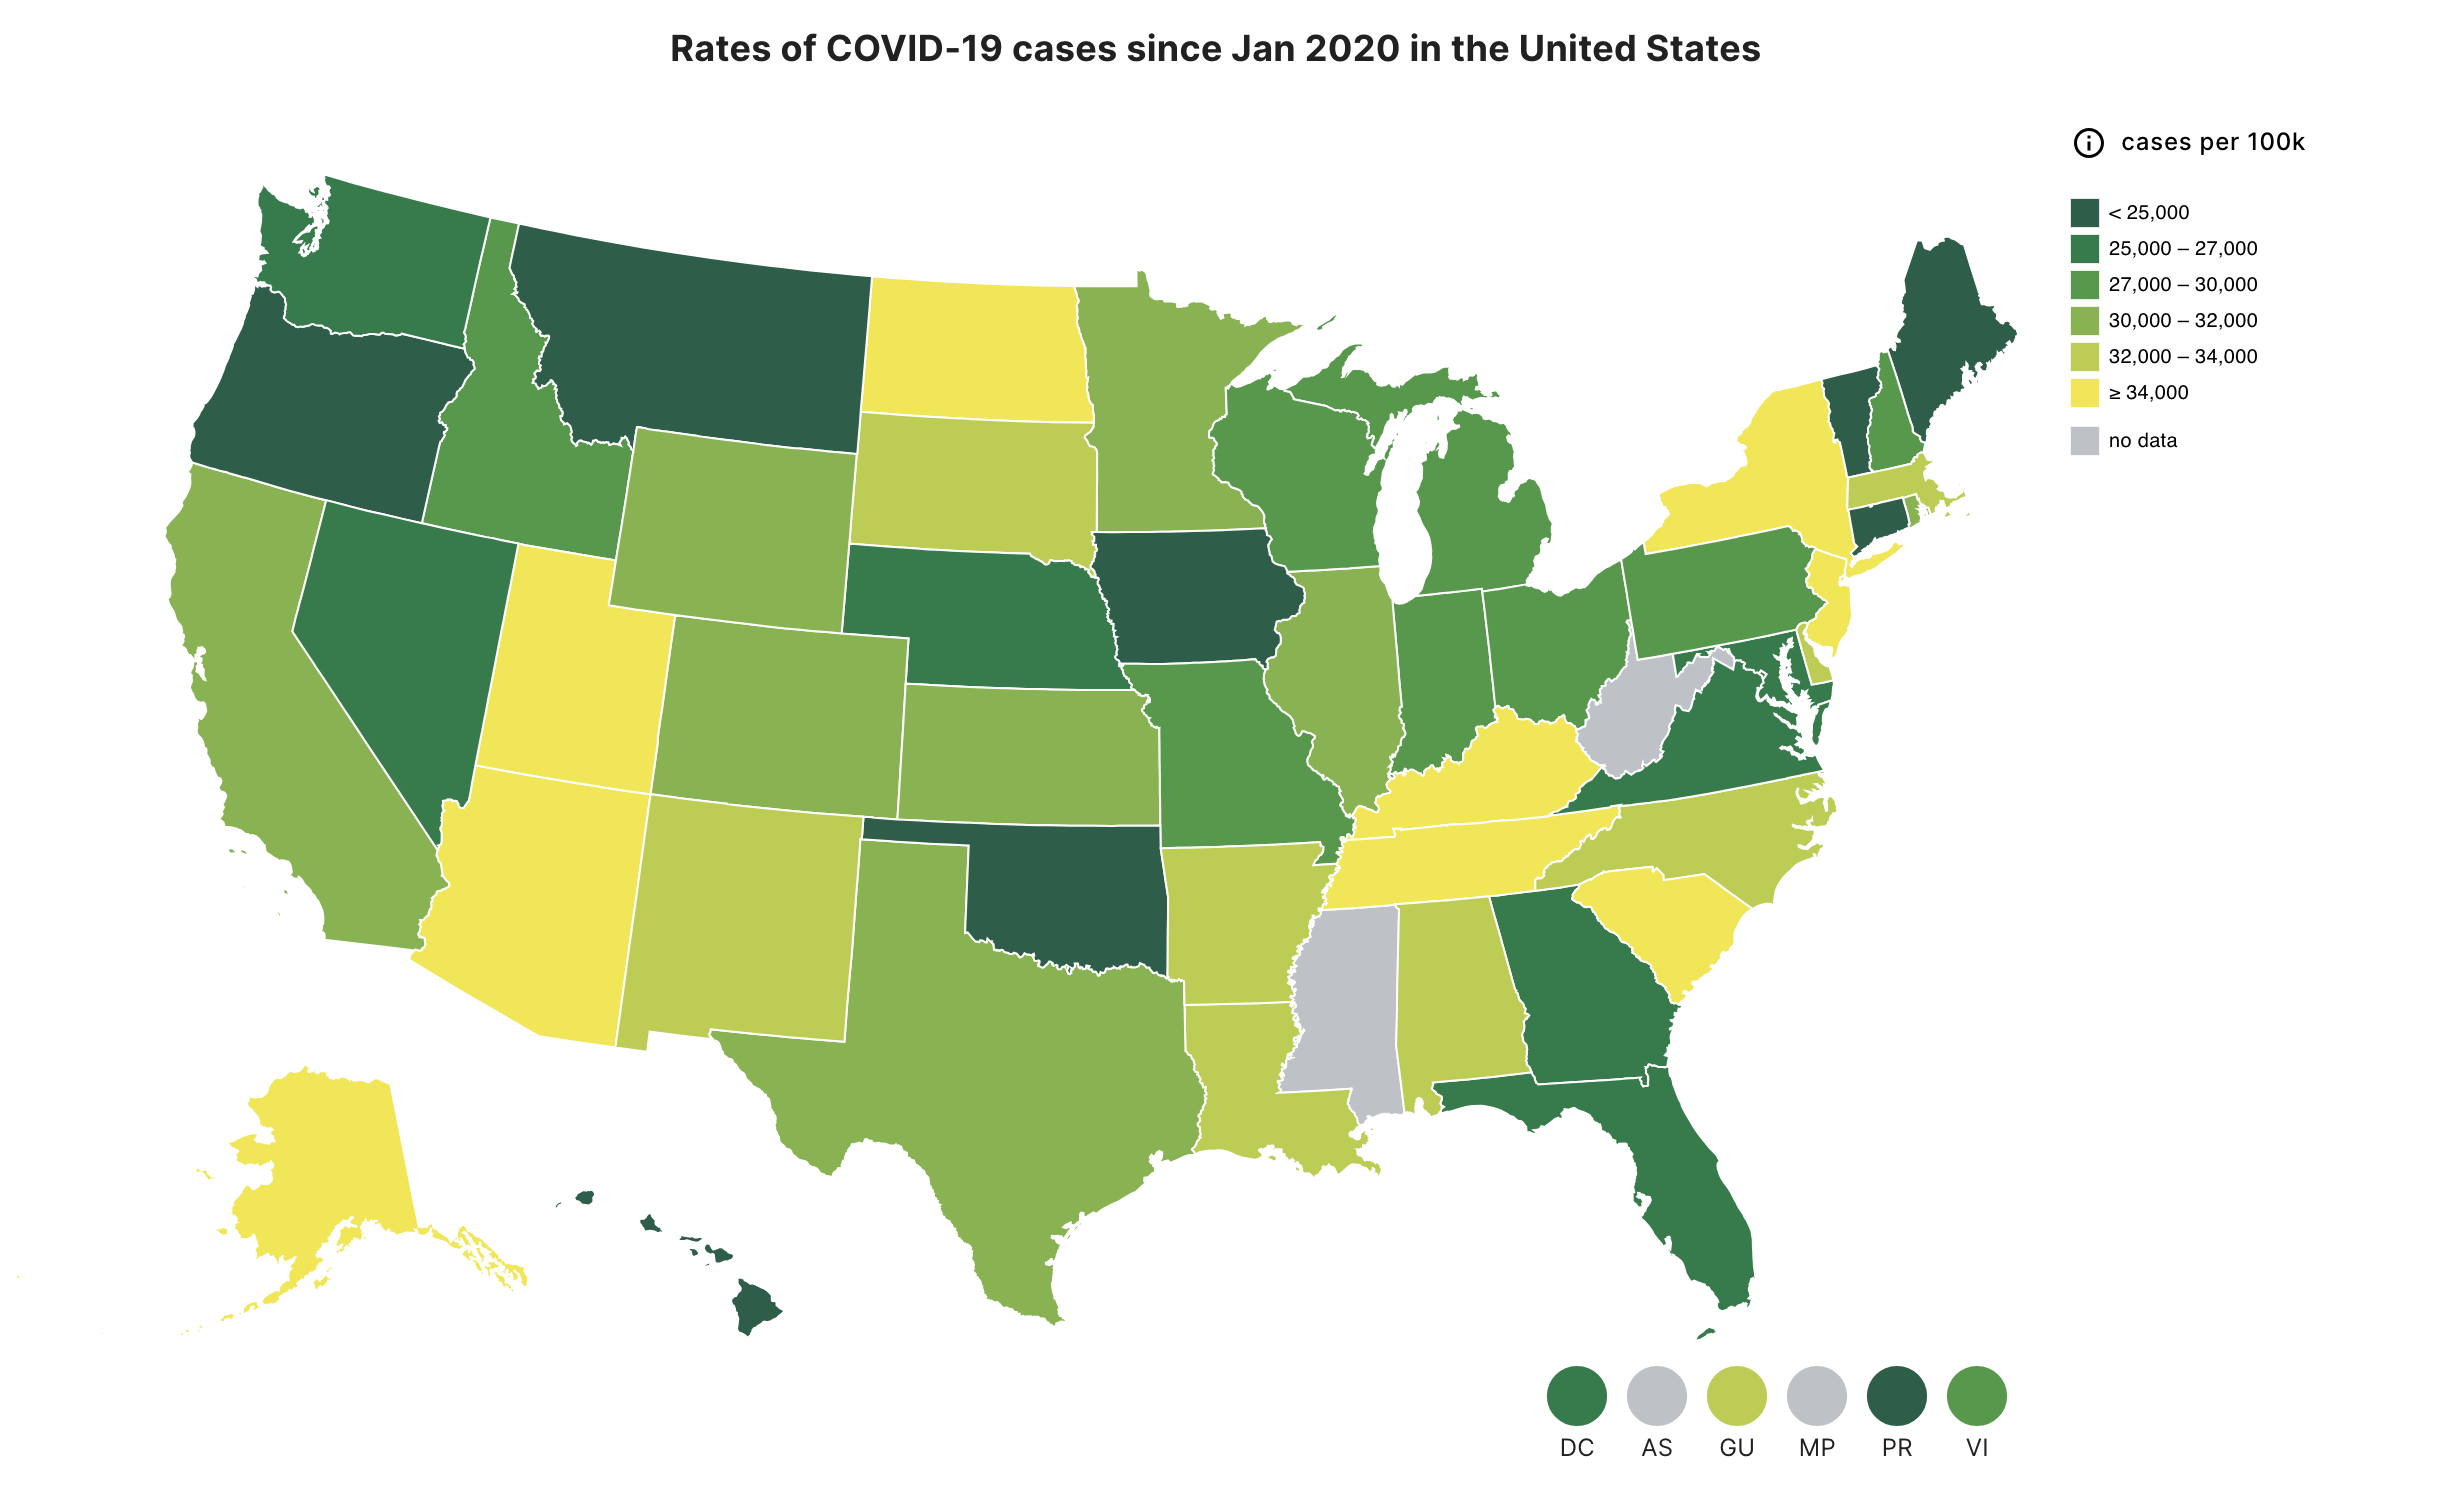 Choropleth map from the Health Equity Tracker showing the United States, with states and territories colored from dark green to yellow representing cumulative COVID rates in each state